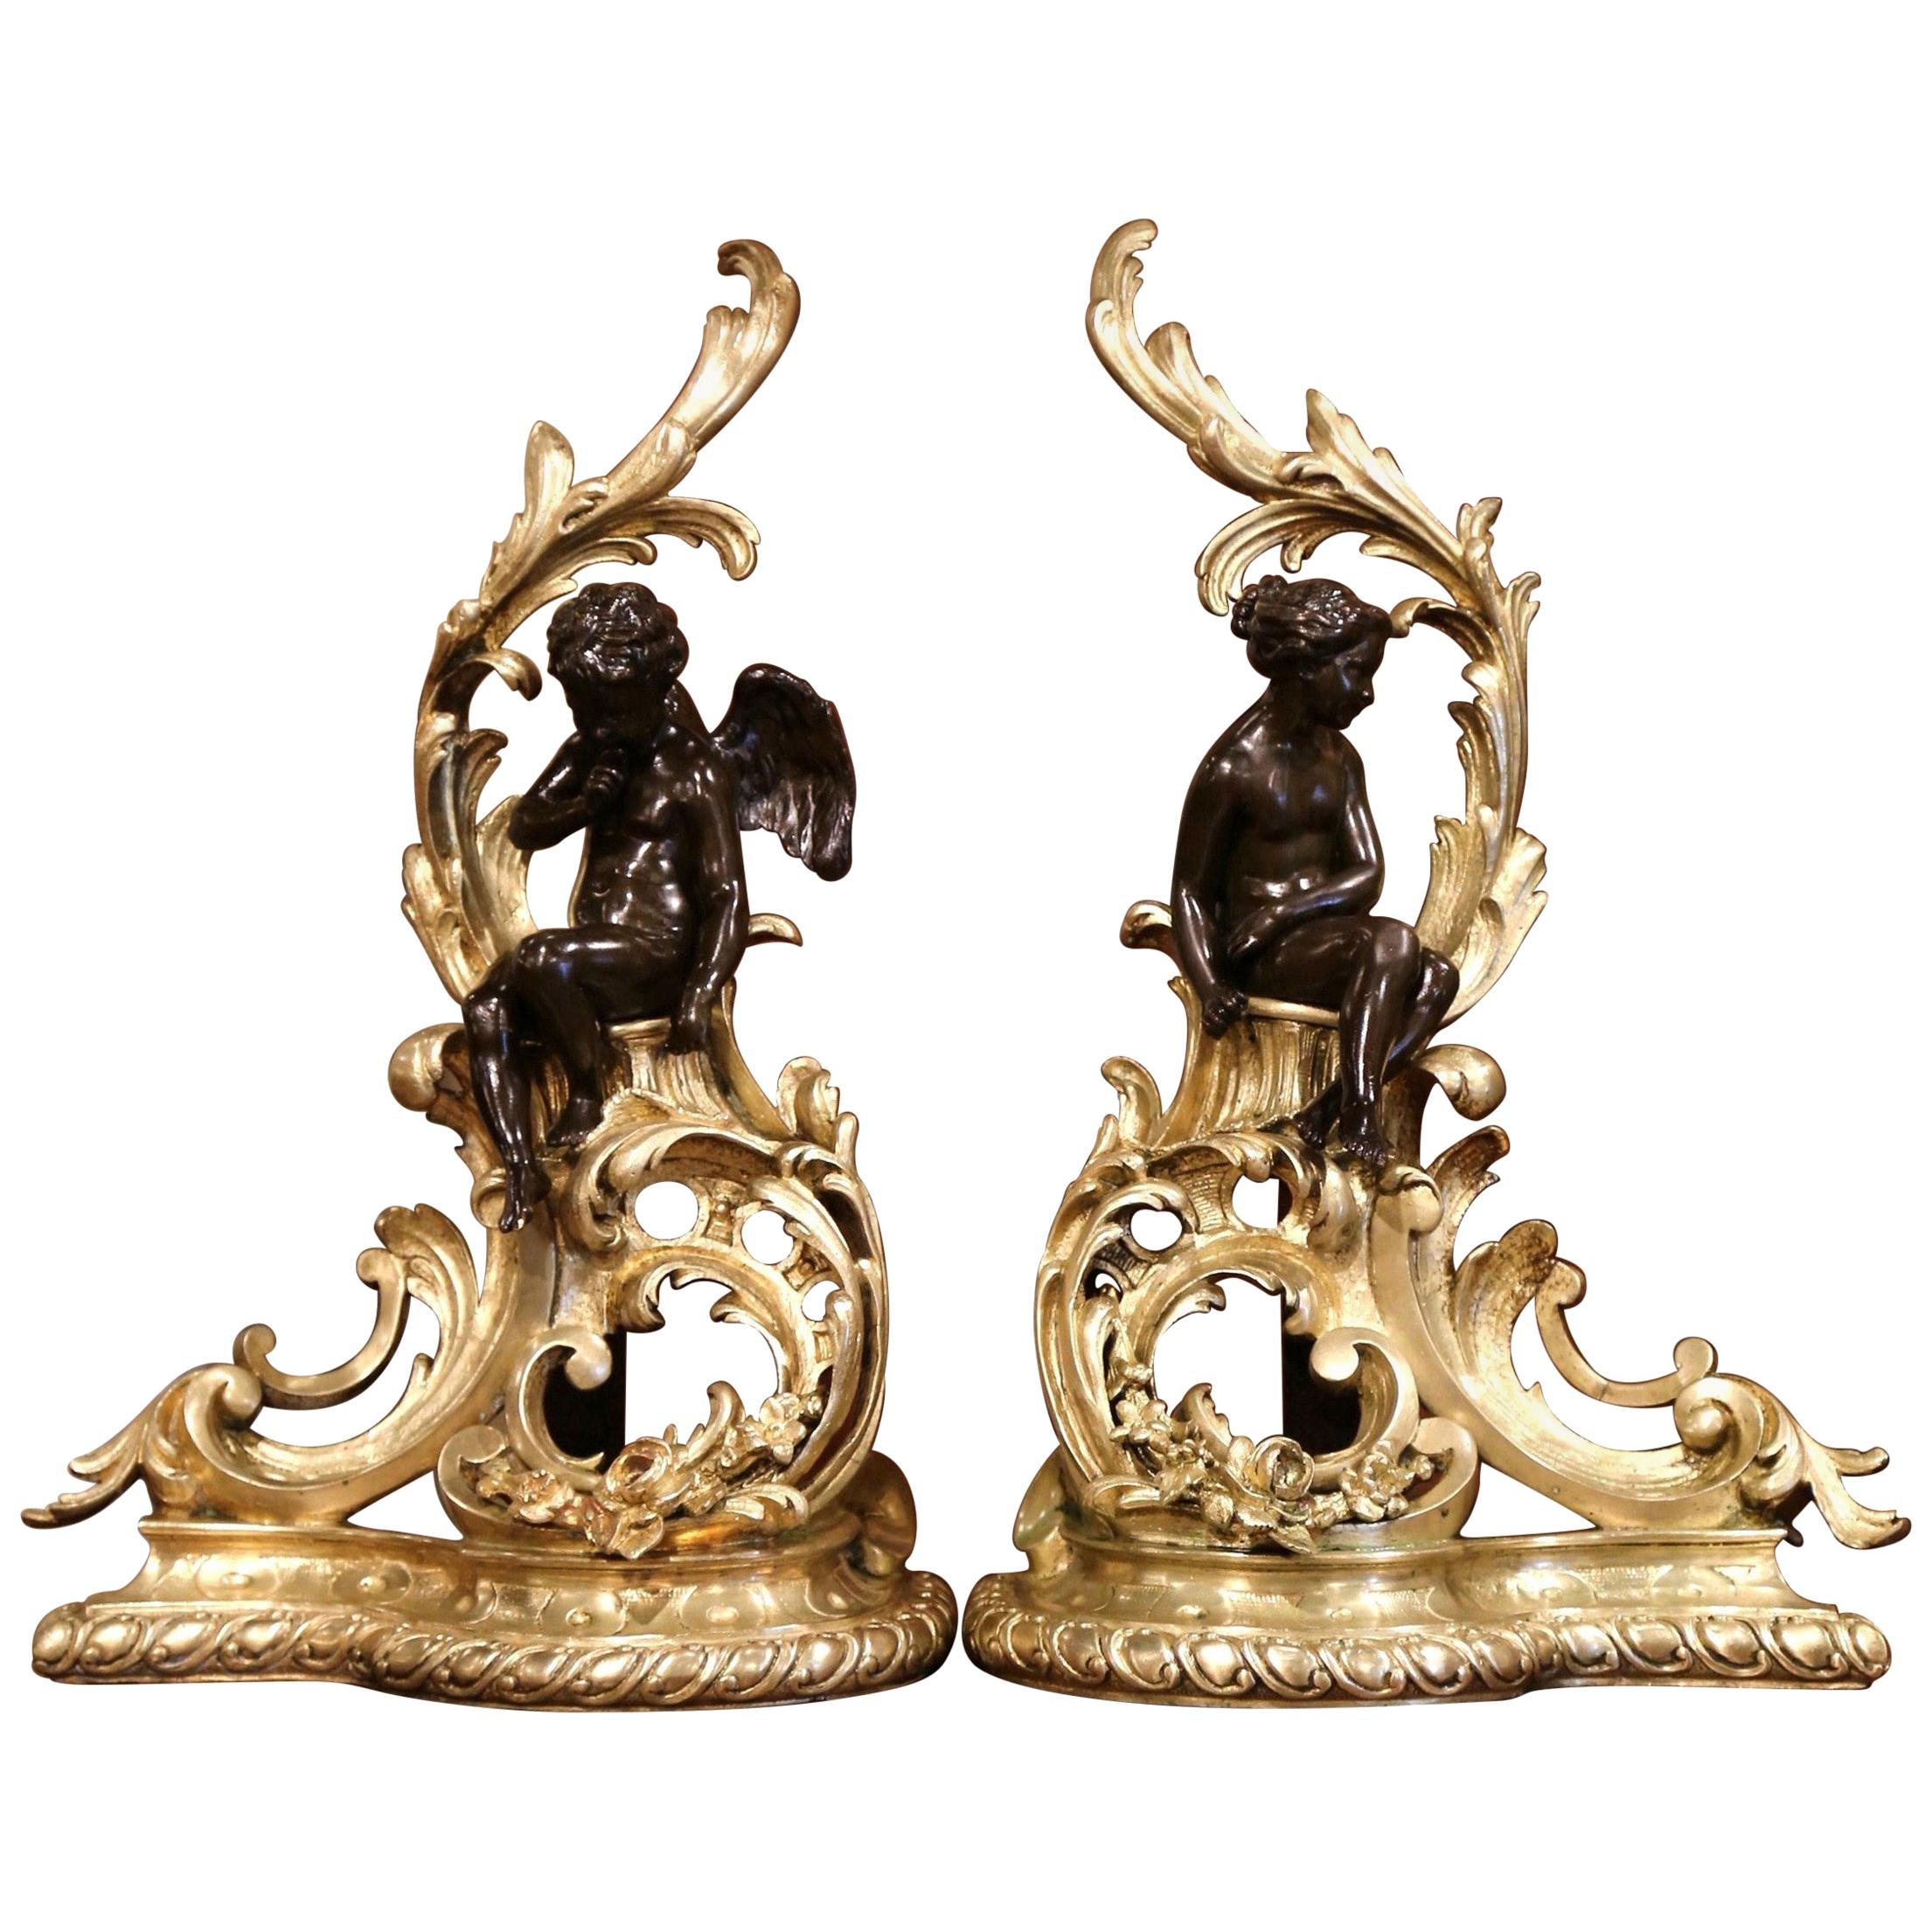 Pair of 19th Century French Louis XV Two-Tone Bronze Andirons with Figures